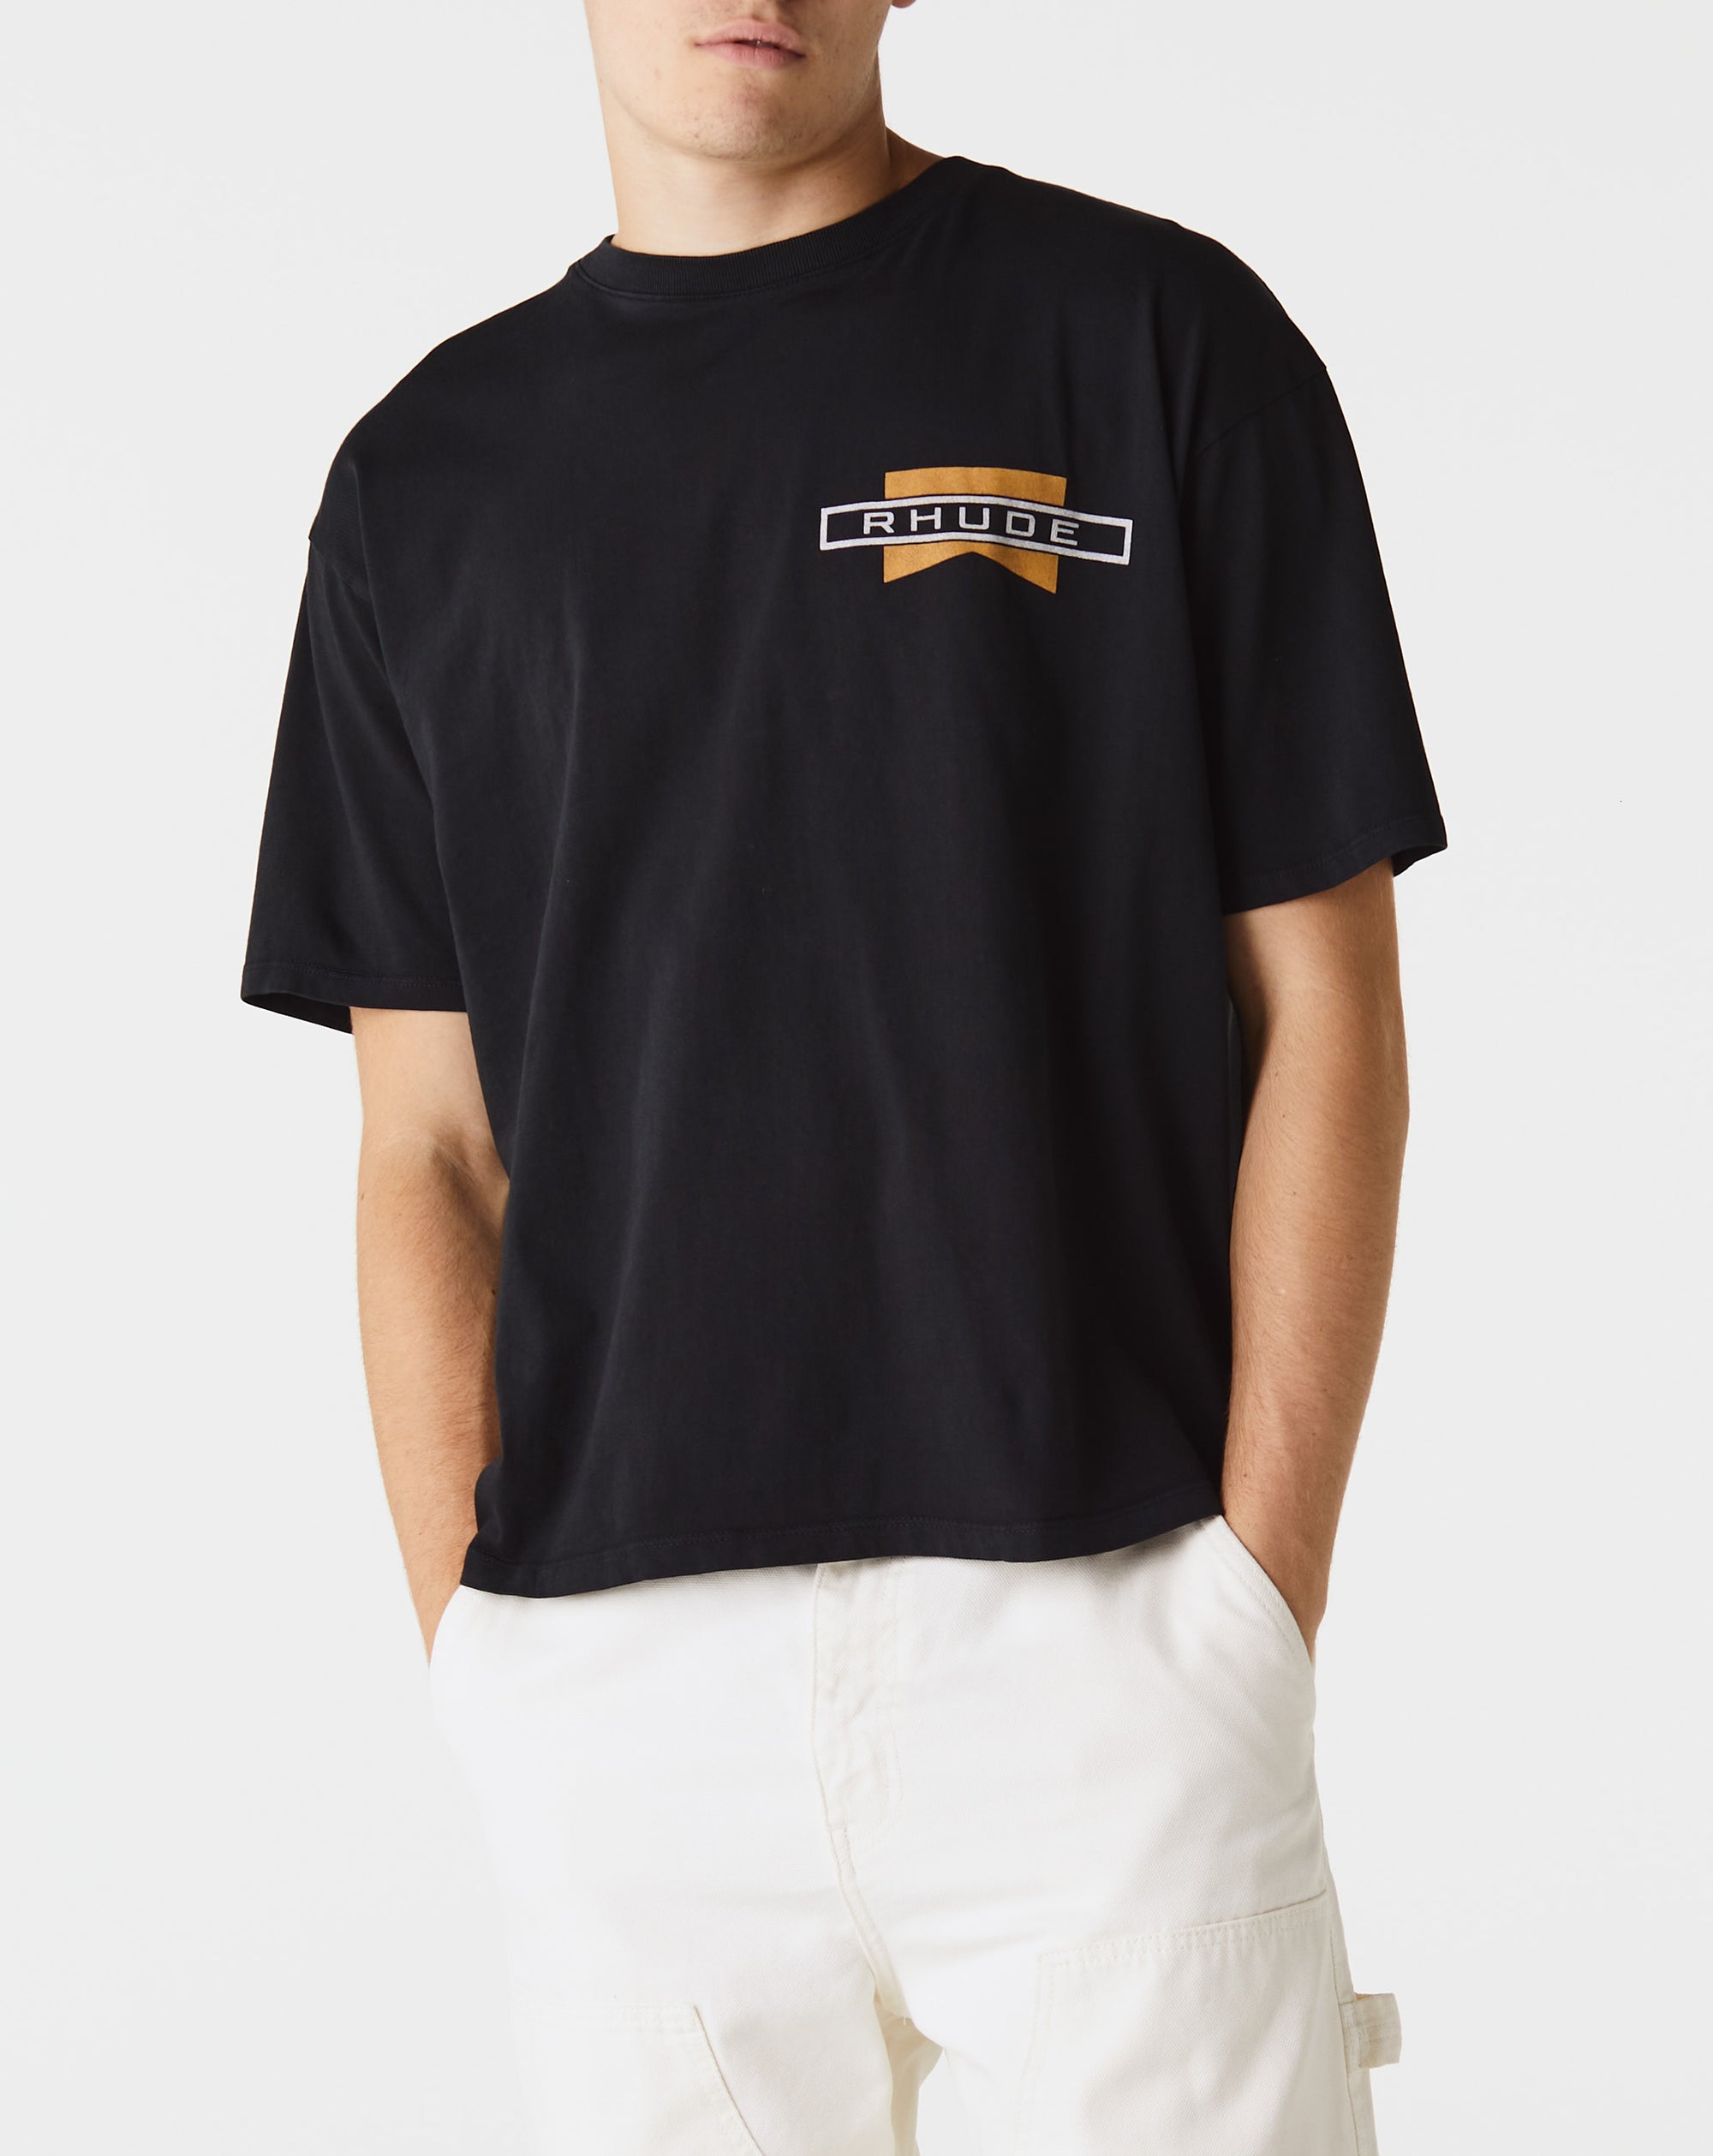 Rhude Hard To Be Humble T-Shirt - Rule of Next Apparel